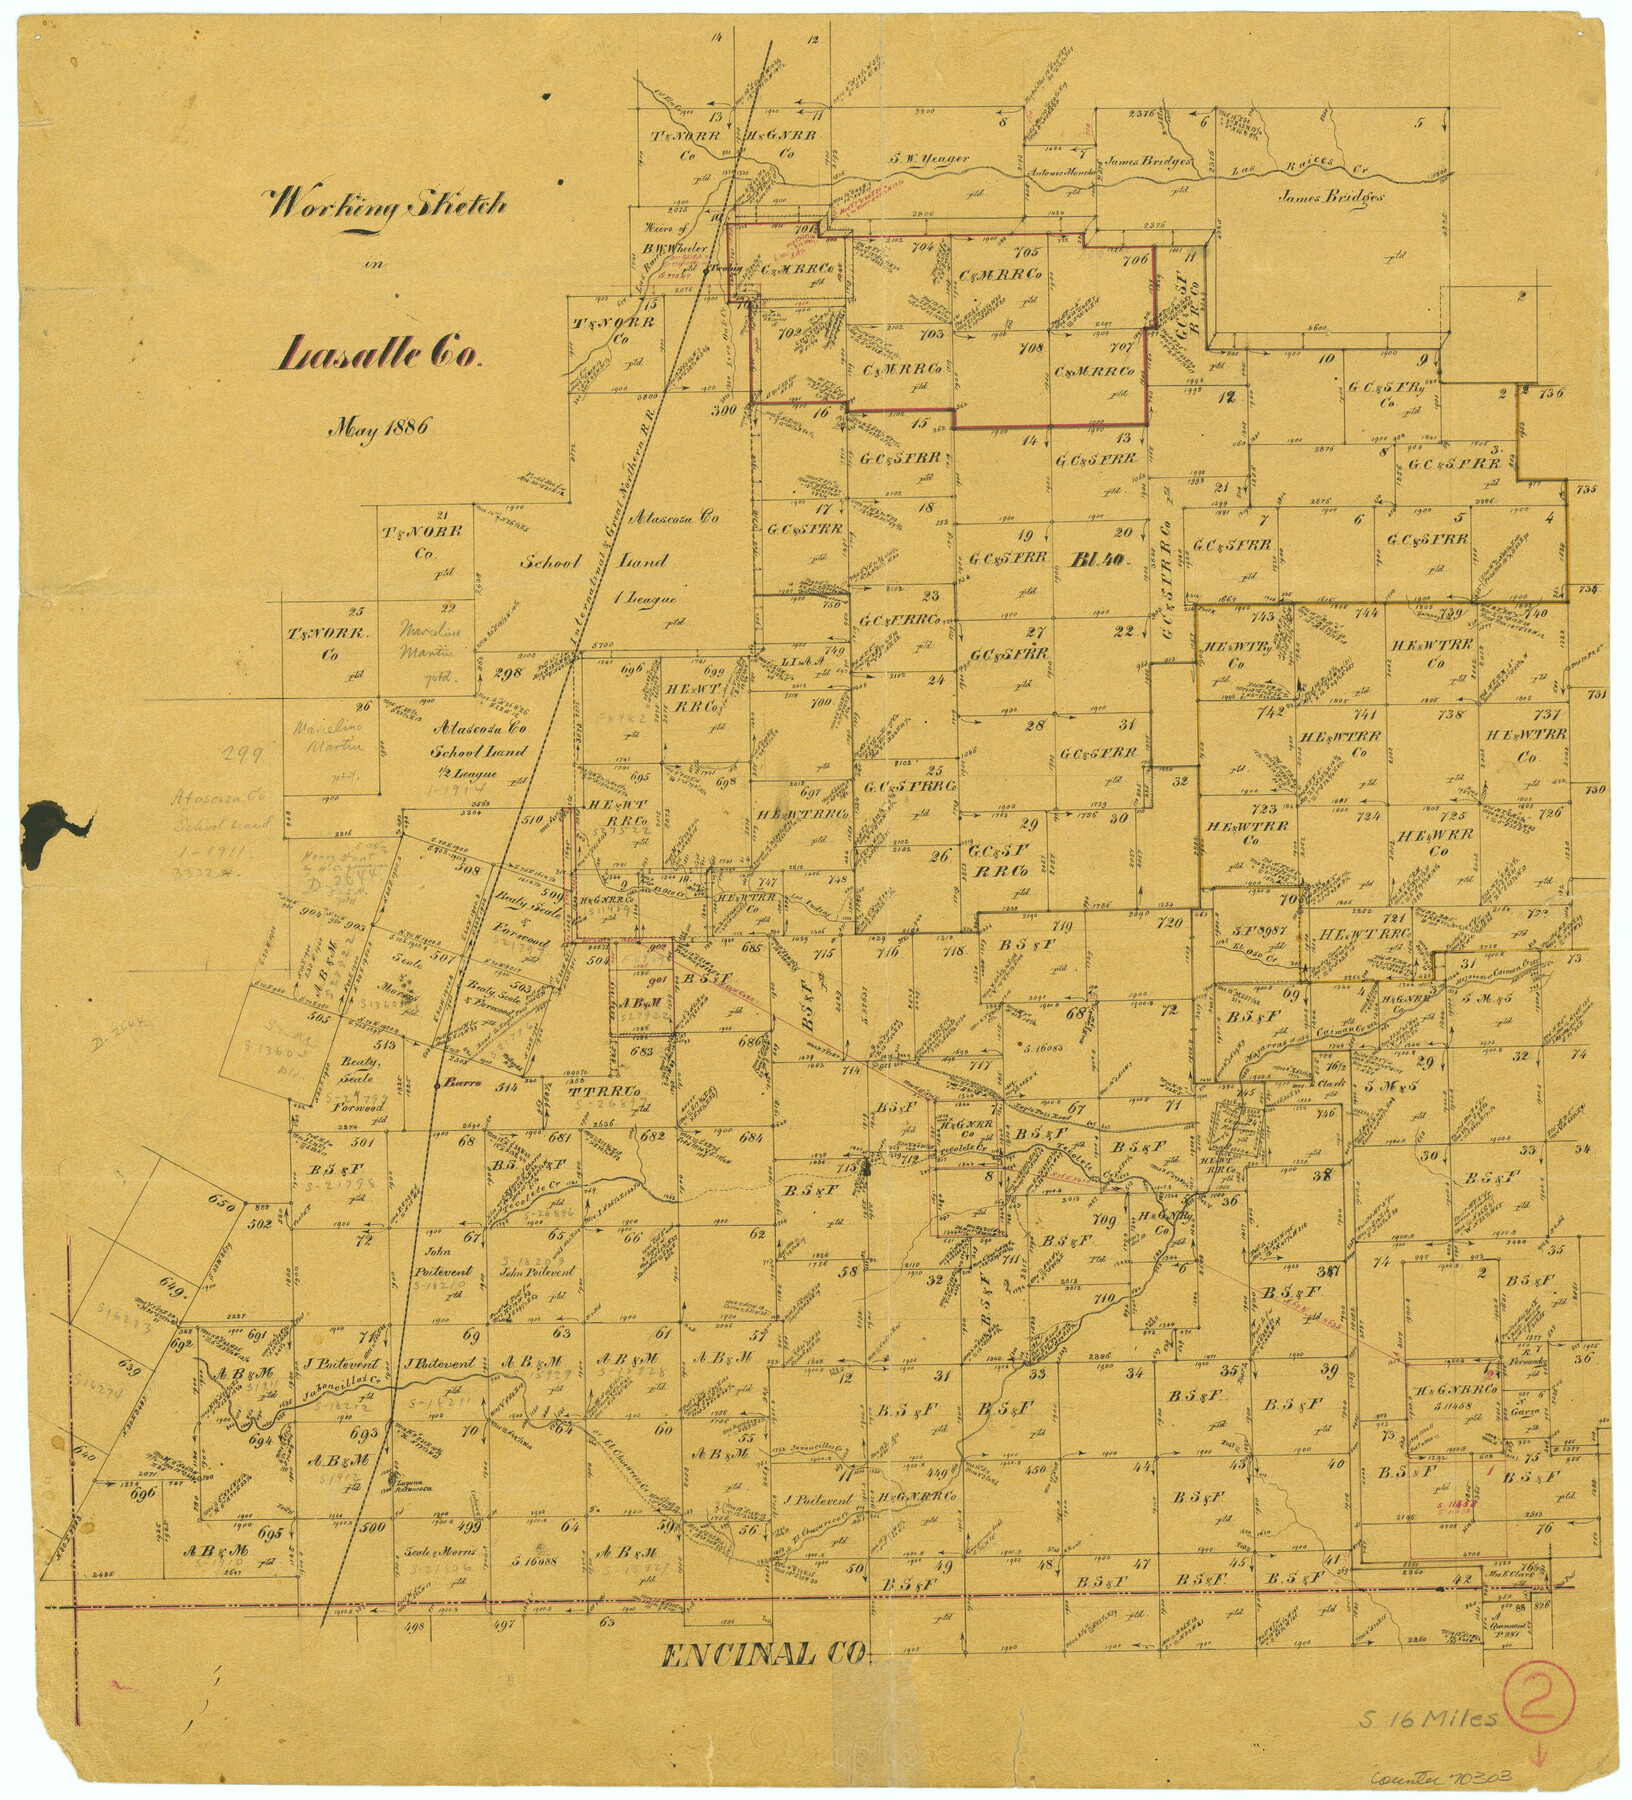 70303, La Salle County Working Sketch 2, General Map Collection